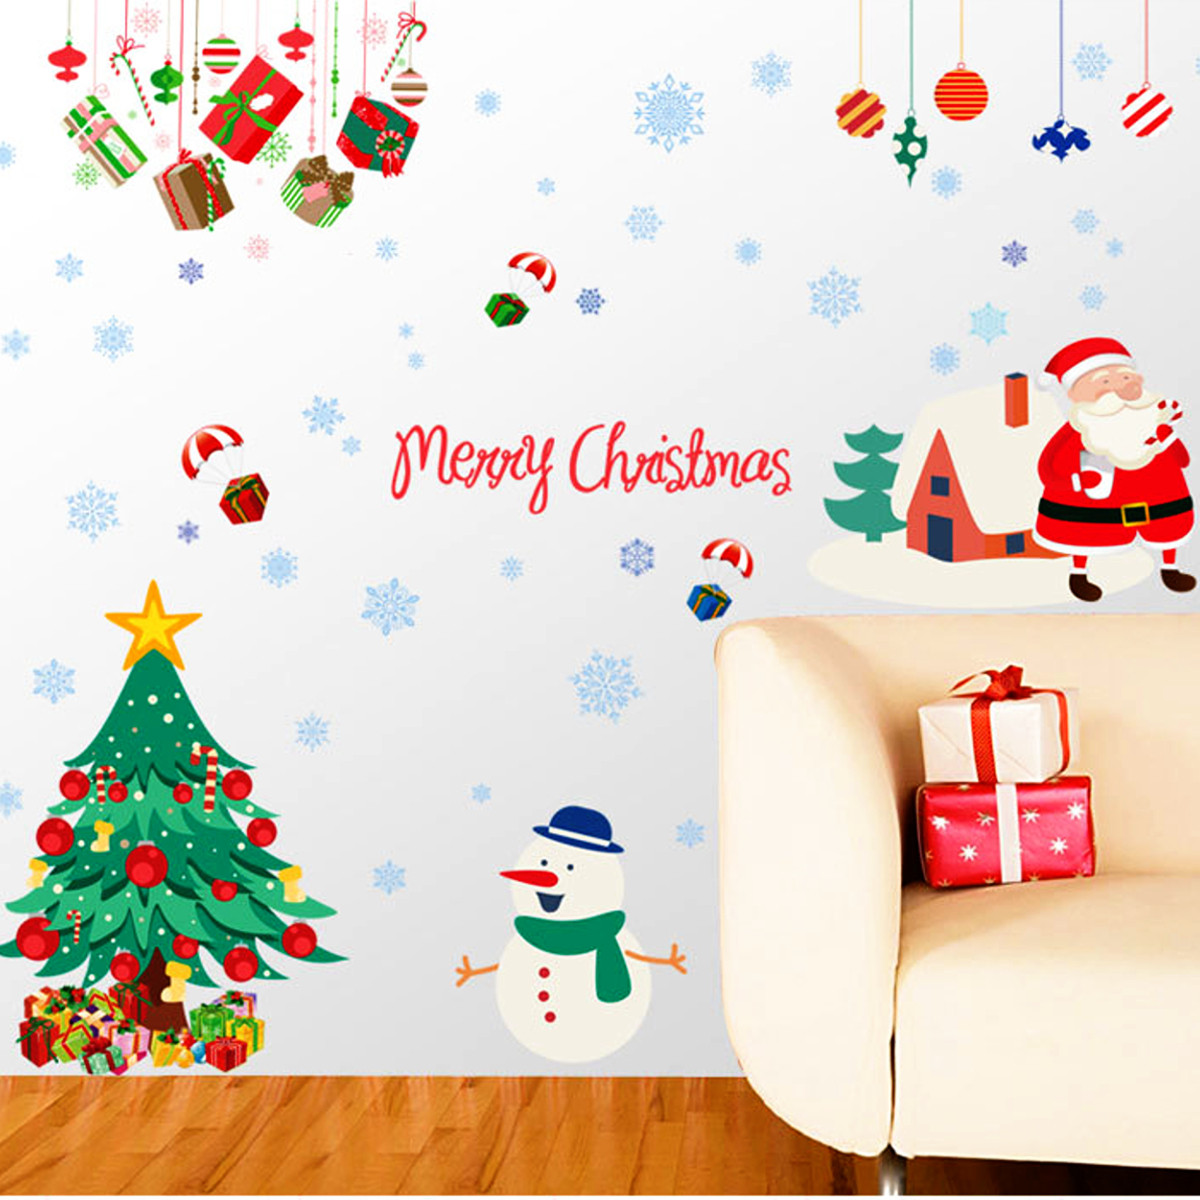 Removable-Christmas-Santa-Snowman-Wall-Stickers-Window-Decal-Home-Decor-1097319-5